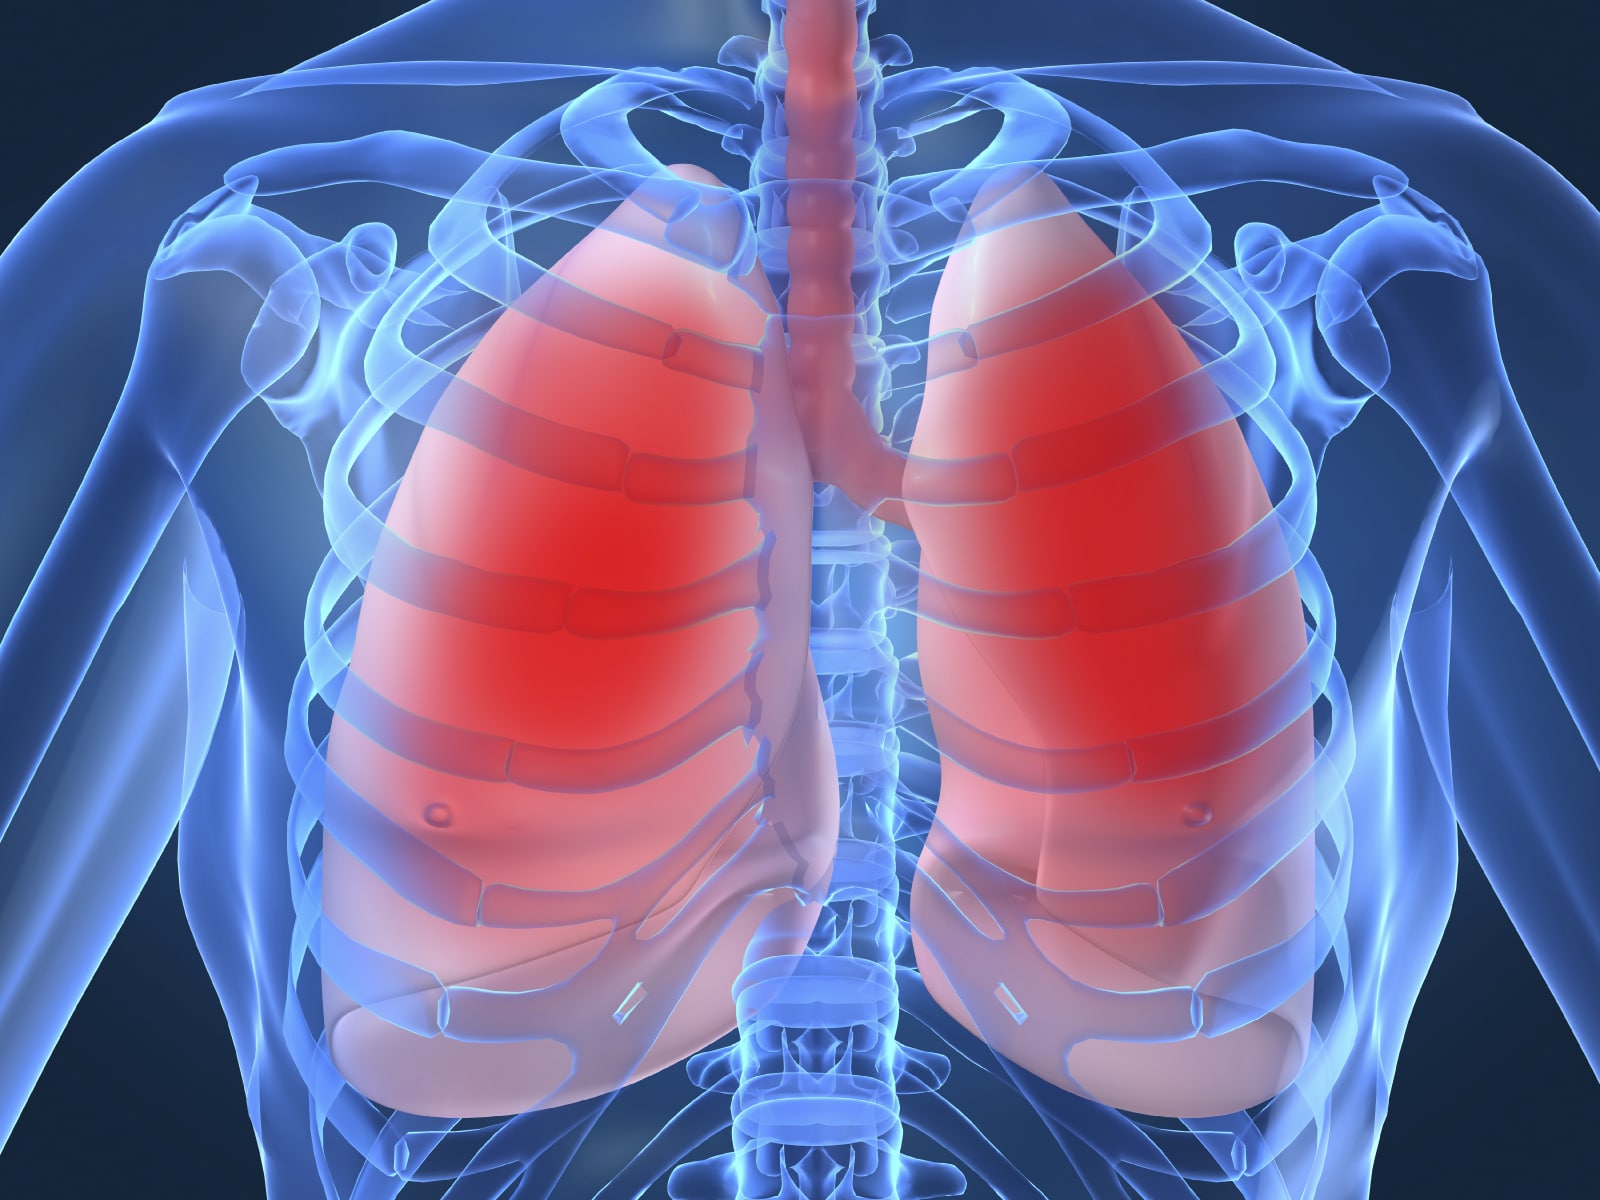 Mesothelioma and Lung Cancer Treatment Options